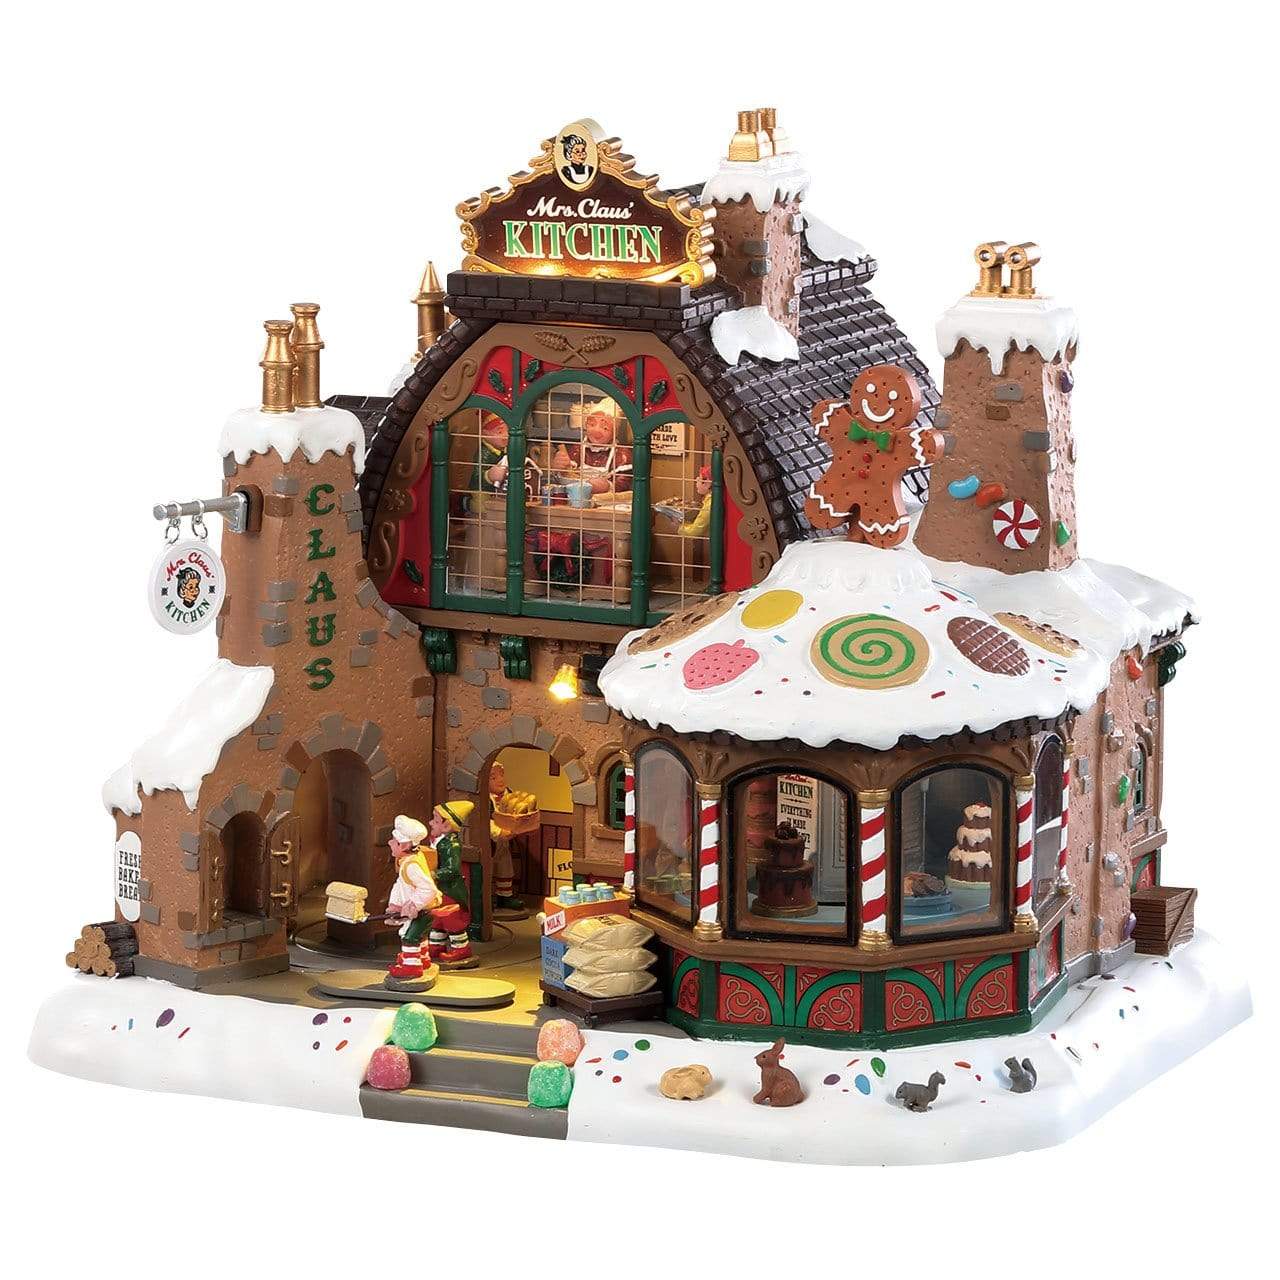 Lemax Sights and Sounds Lemax Mrs Claus Kitchen, Christmas Village Building, Adaptor Included